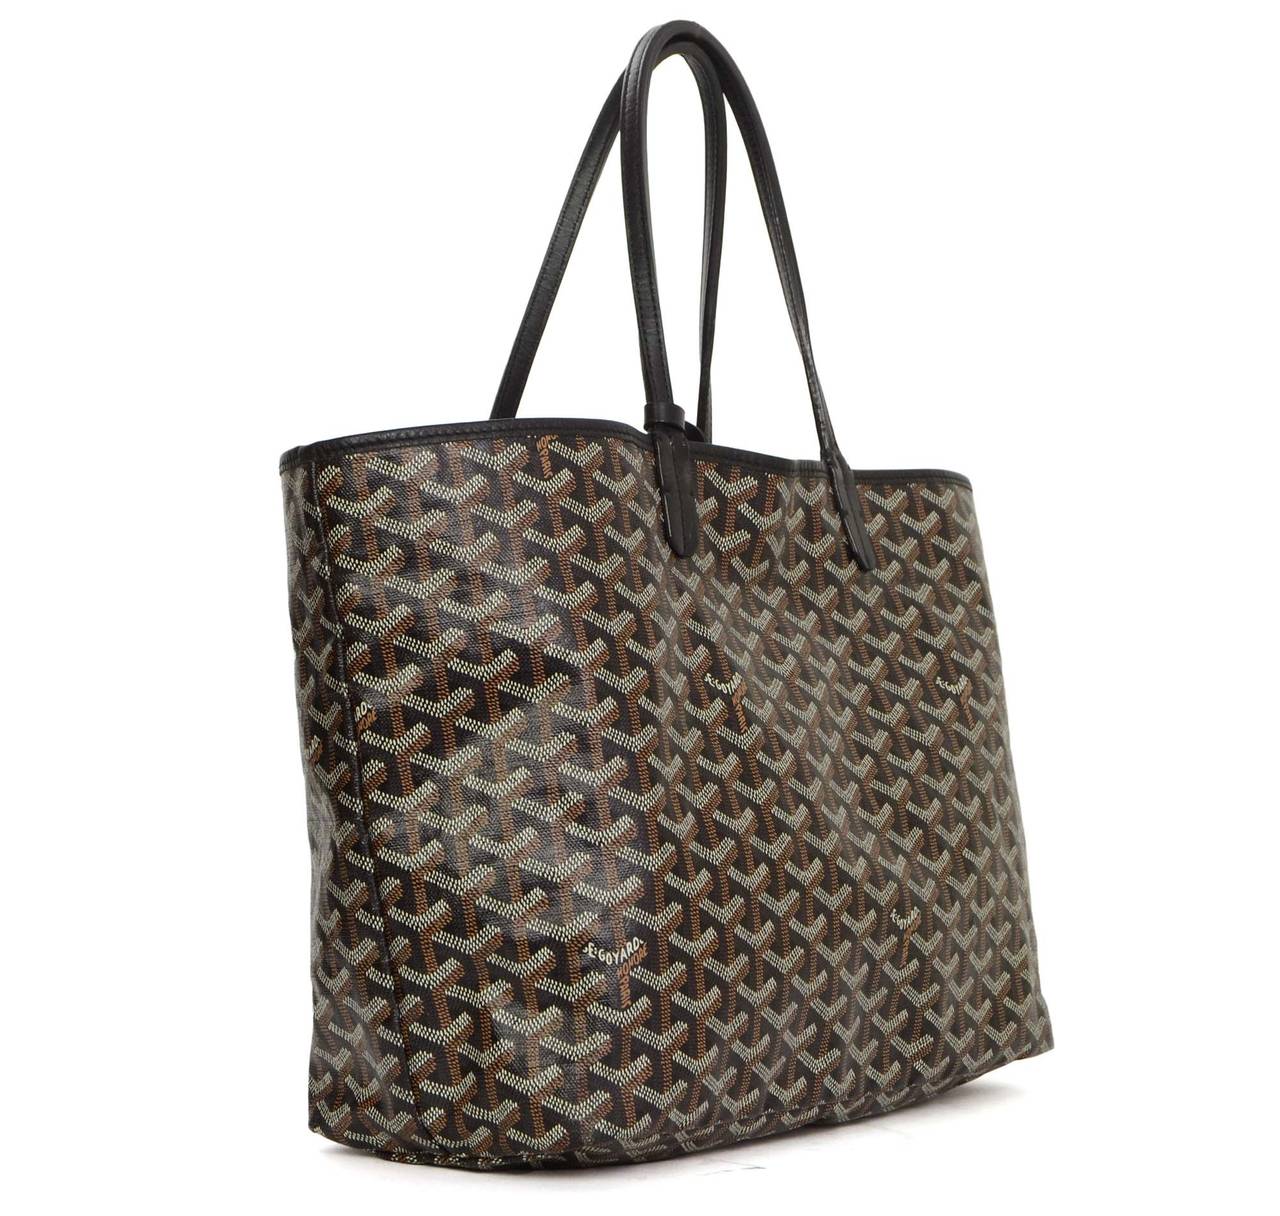 Goyard Chevron Print Coated Canvas St. Louise PM Tote
Features matching insert attached to shoulder strap
Made in: France
Color: Black, white and brown
Hardware: None
Materials: Coated canvas
Lining: Beige canvas
Closure/opening: